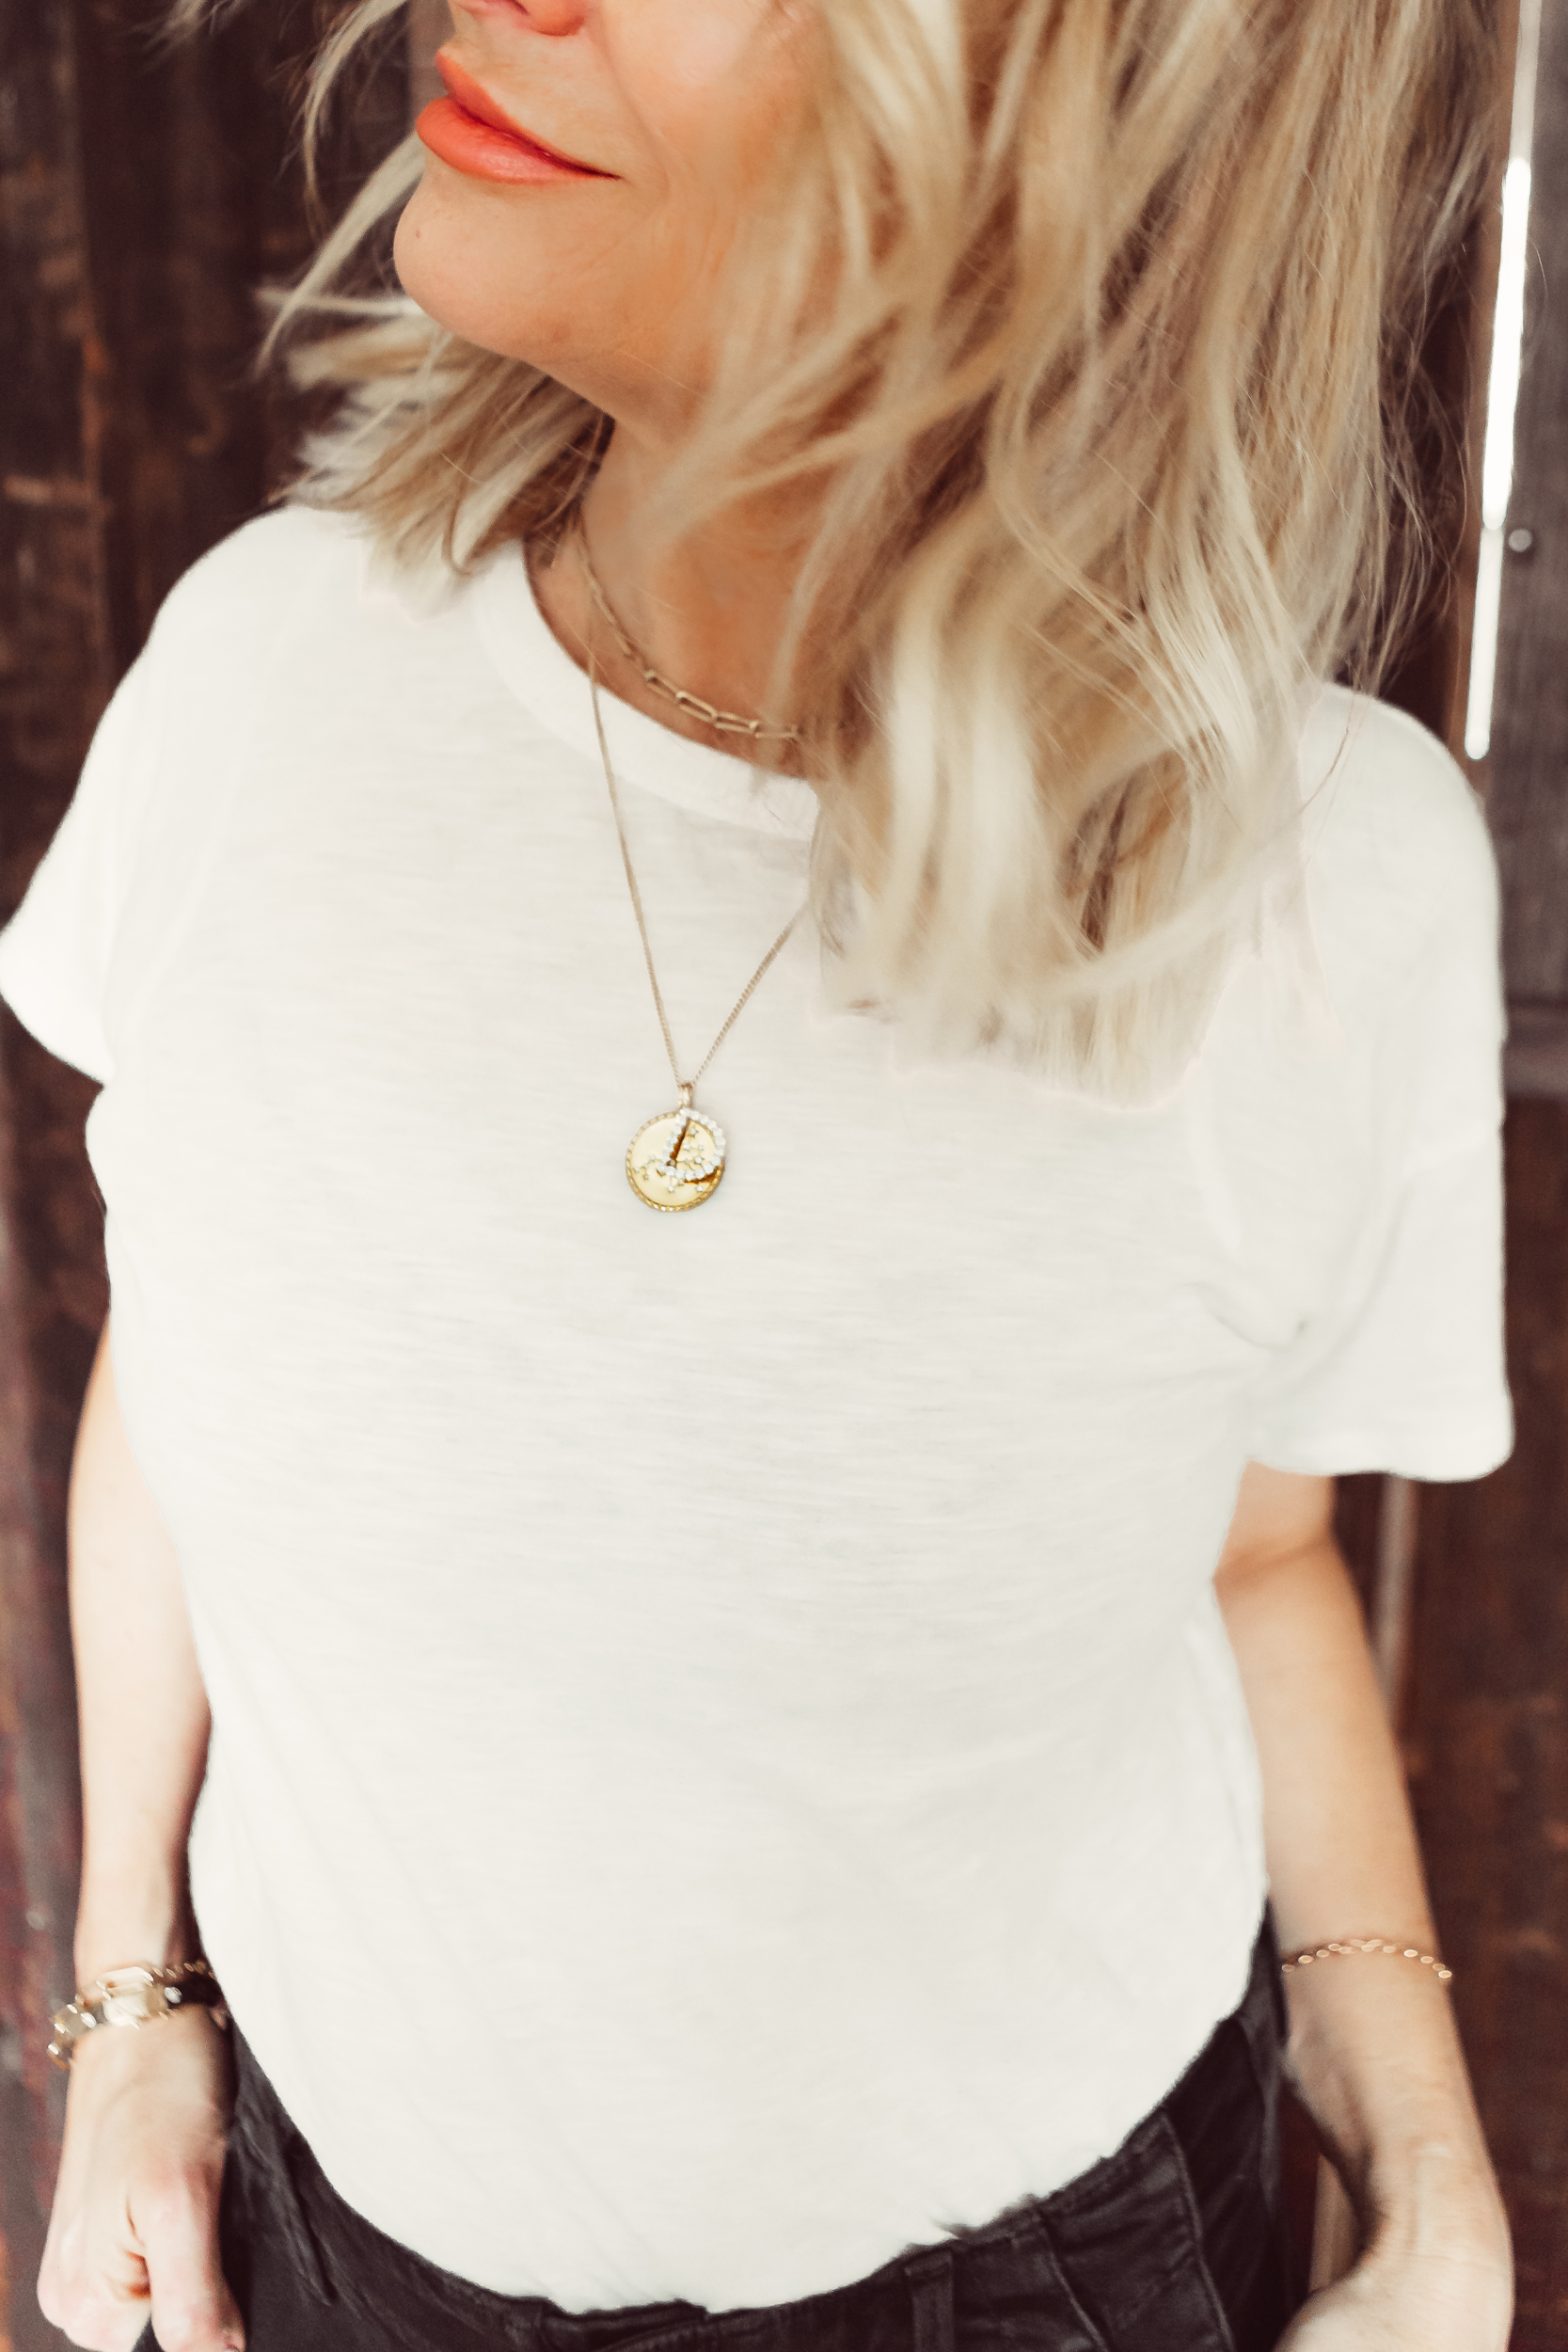 necklace on white shirt